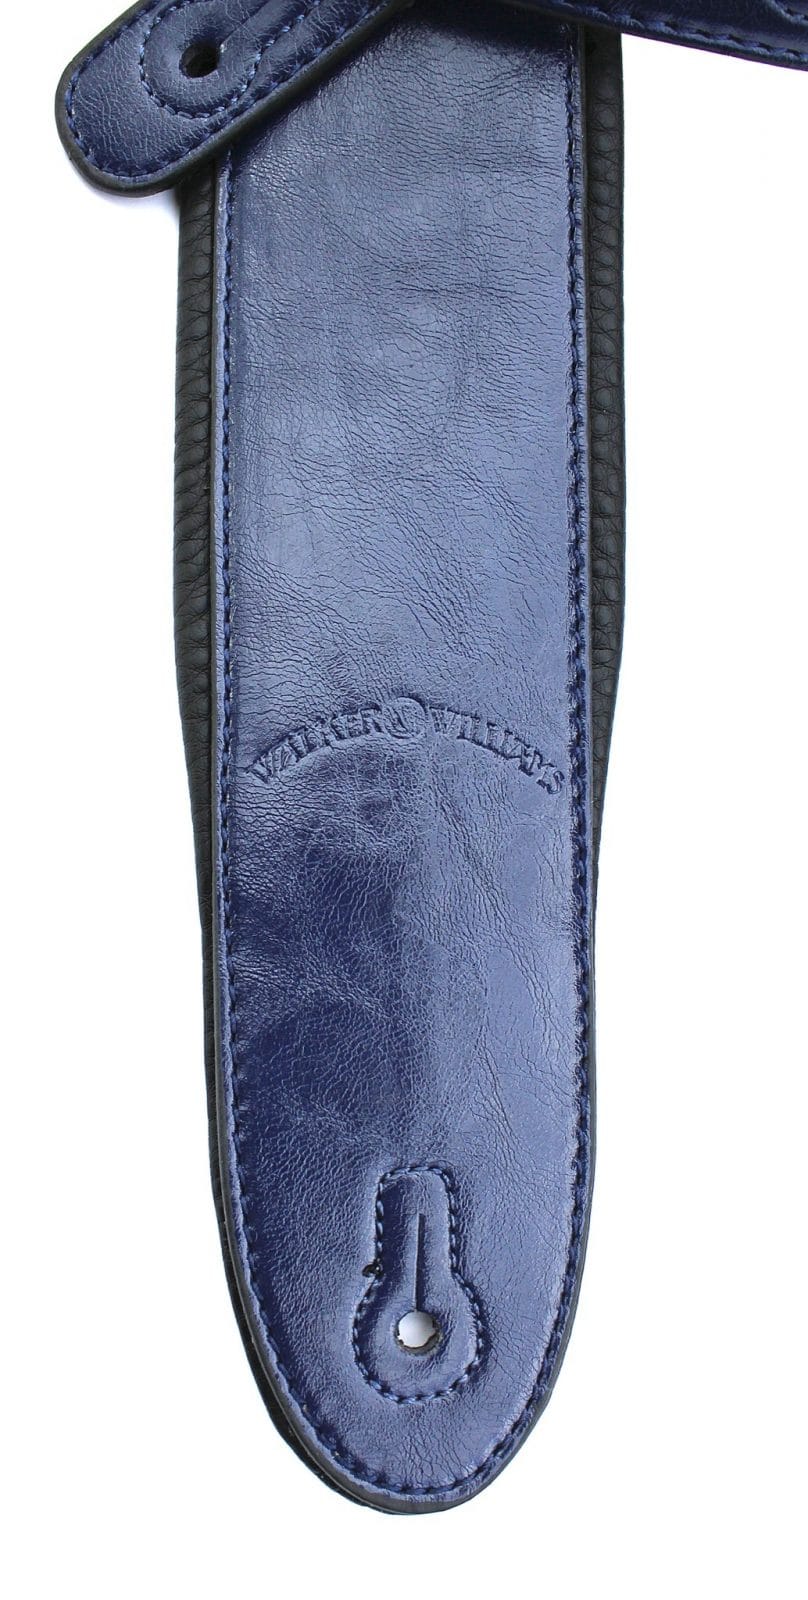 Walker & Williams G-25 Dark Blue Guitar Strap with Padded Glove Leather Back